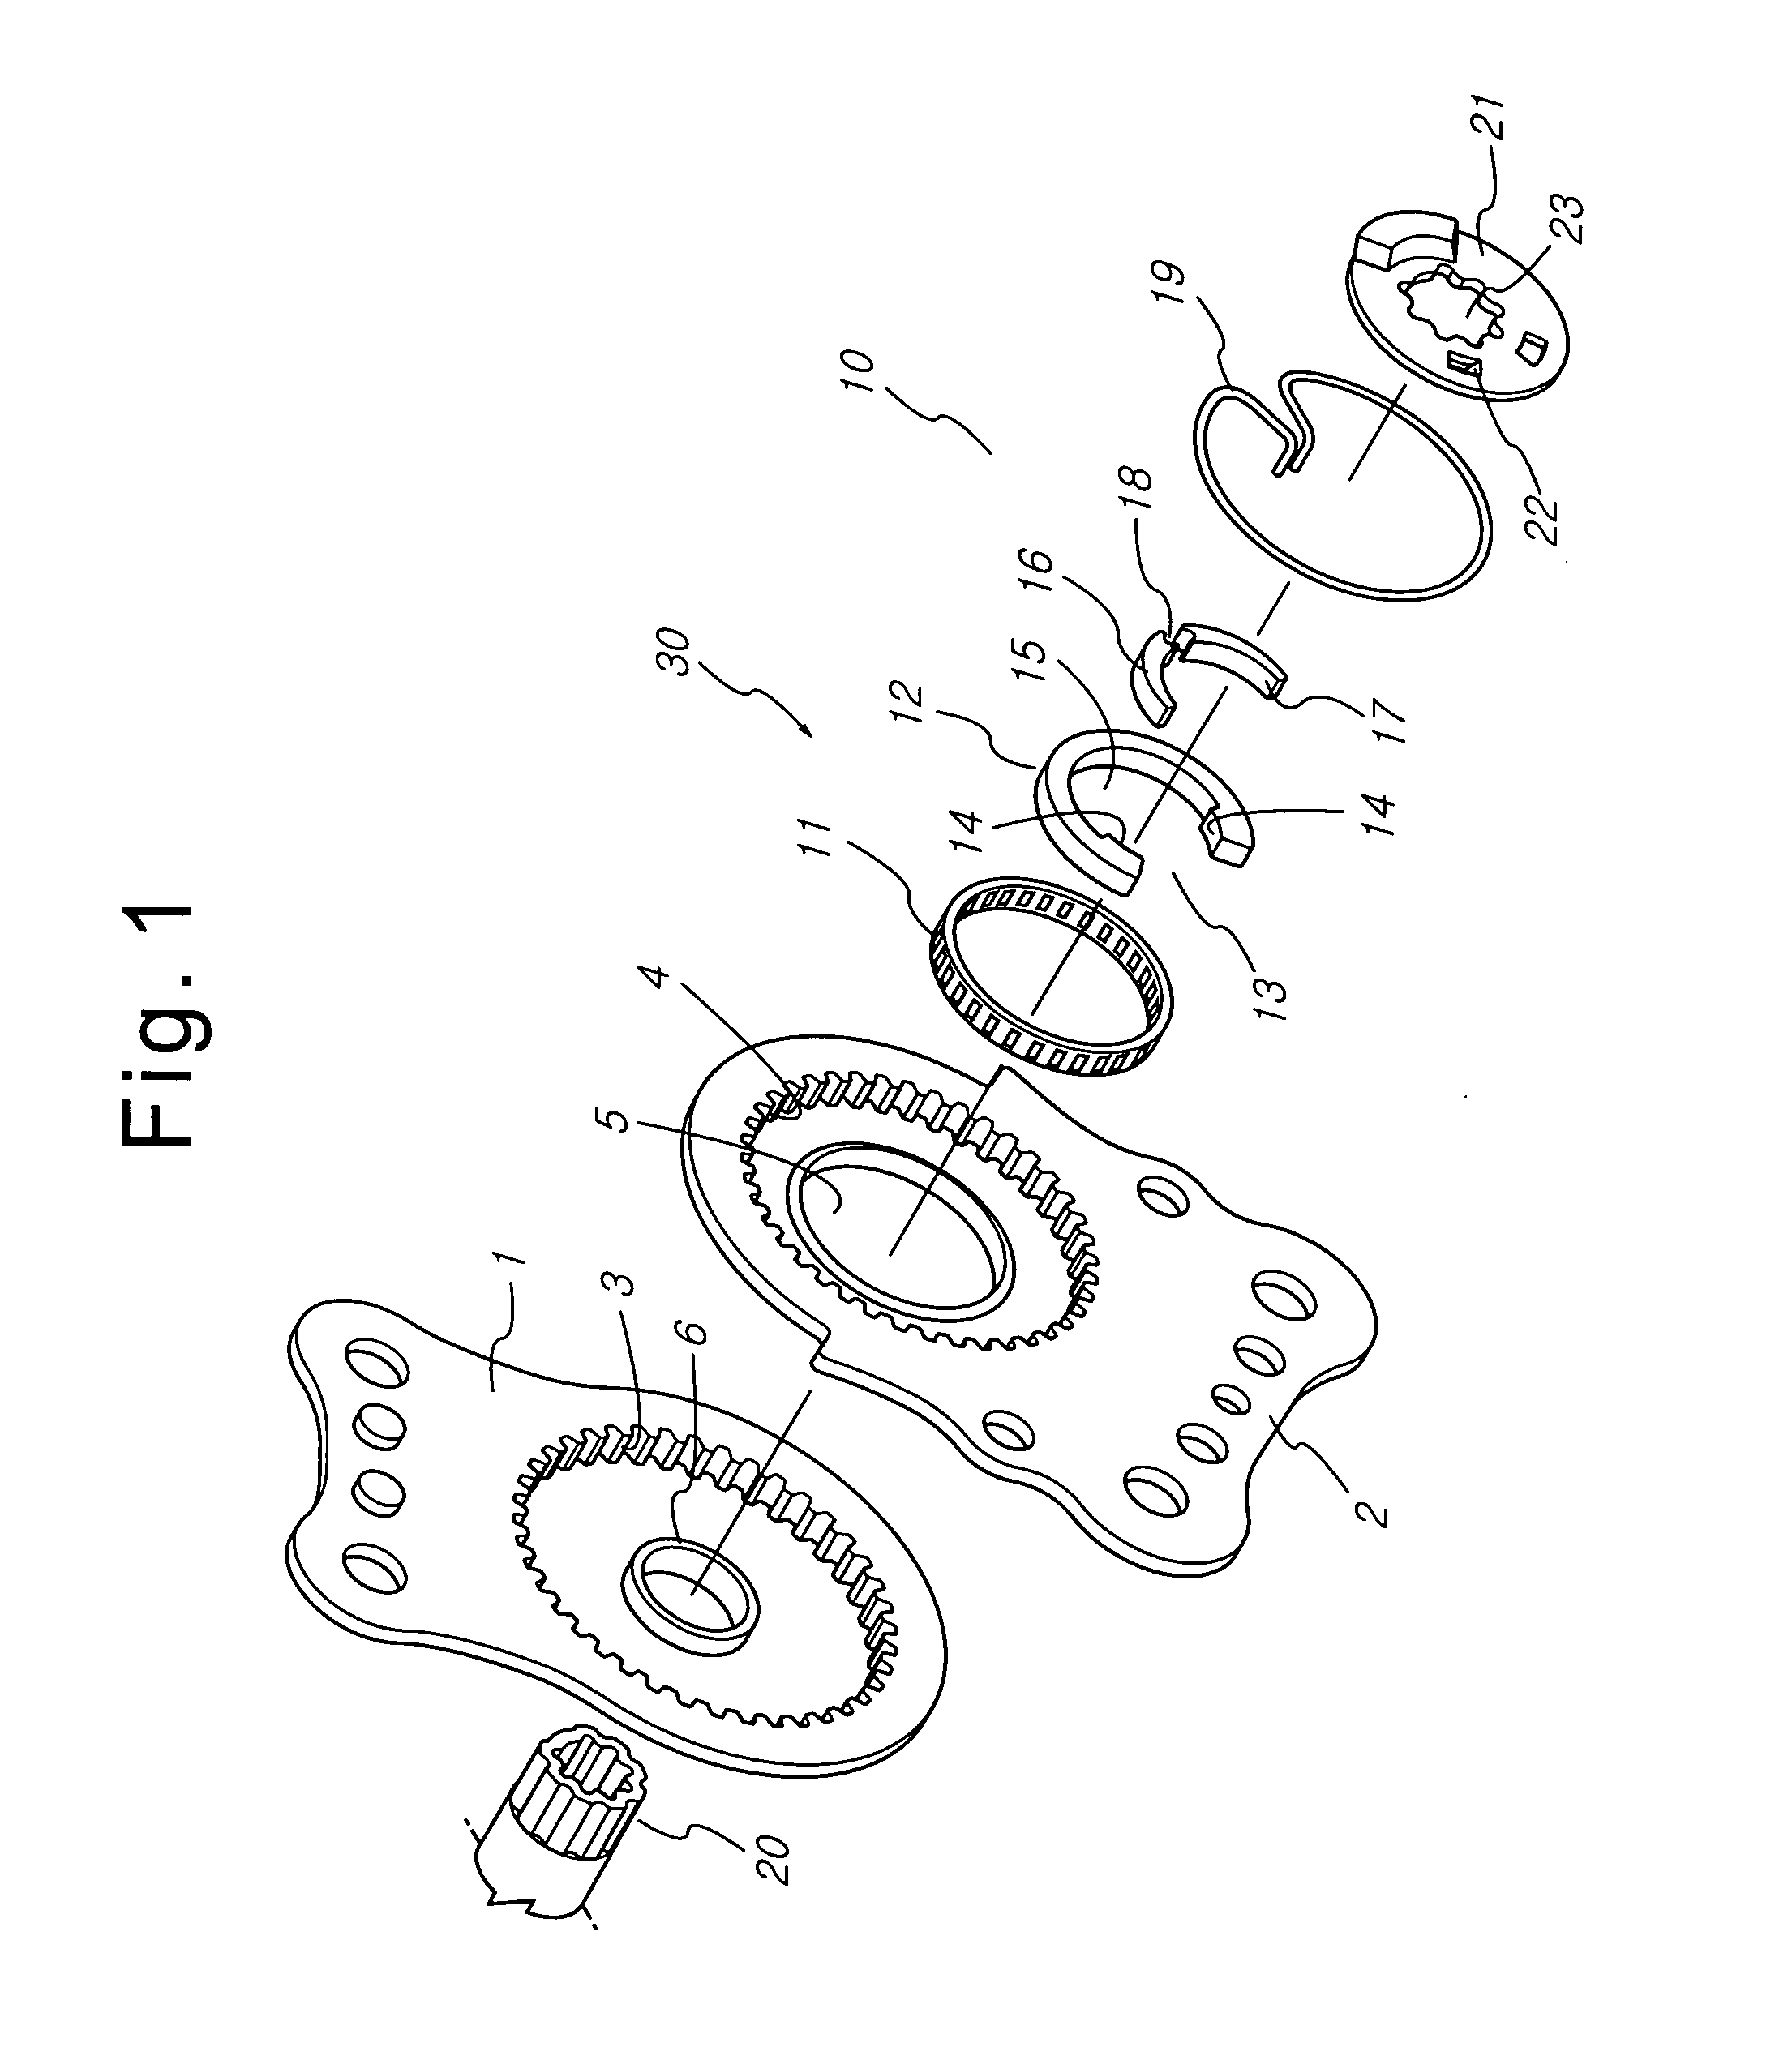 Continuously operable seat-reclining device for vehicles